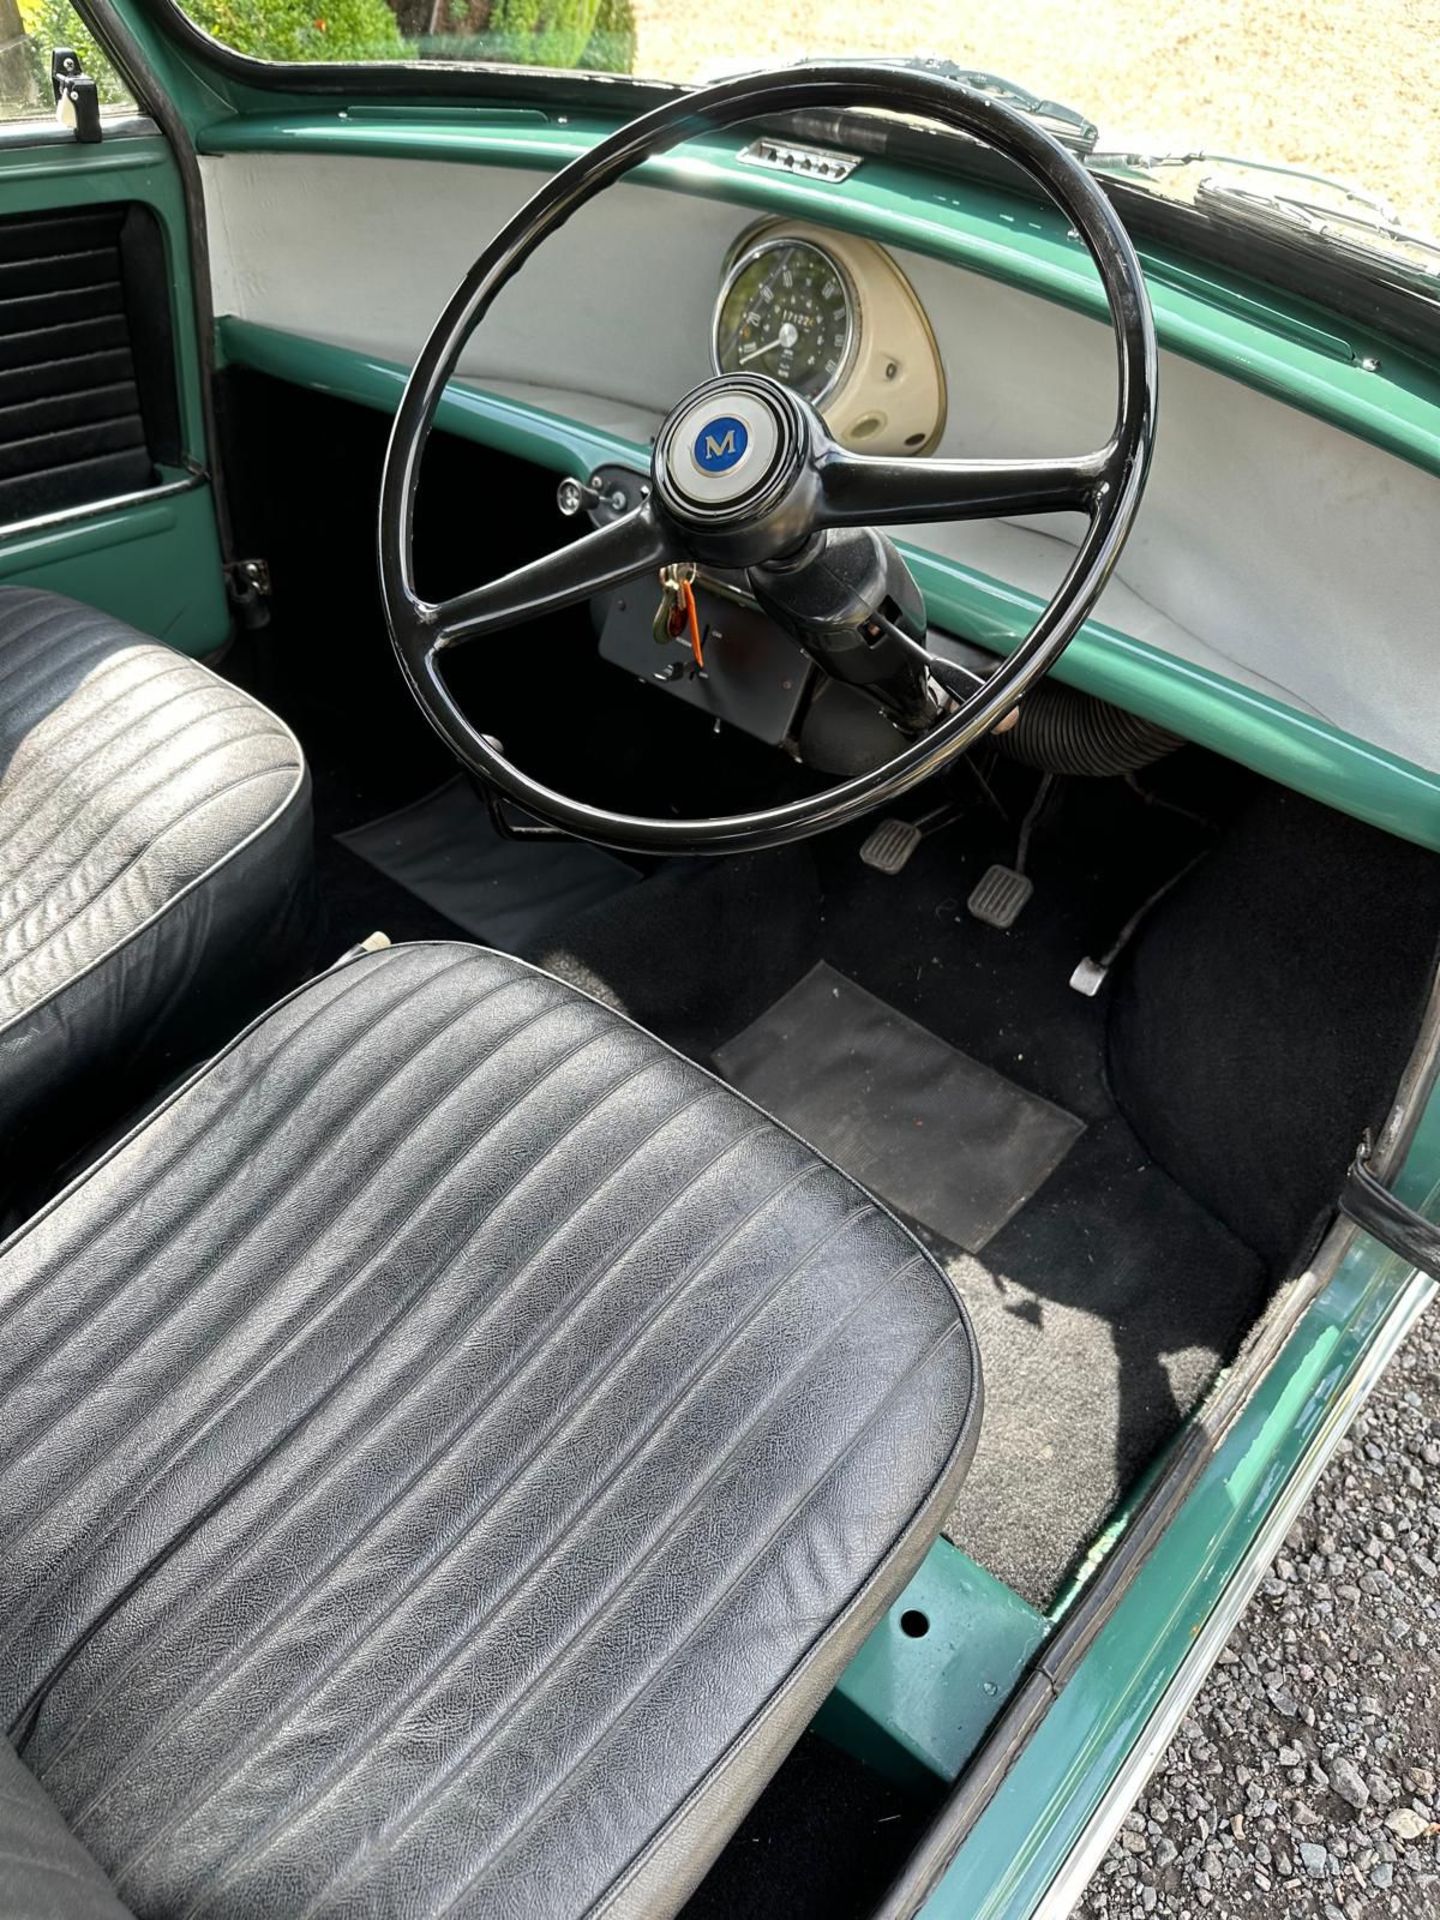 1968 Mini 860 - just 17,000 miles from new! - Image 8 of 27